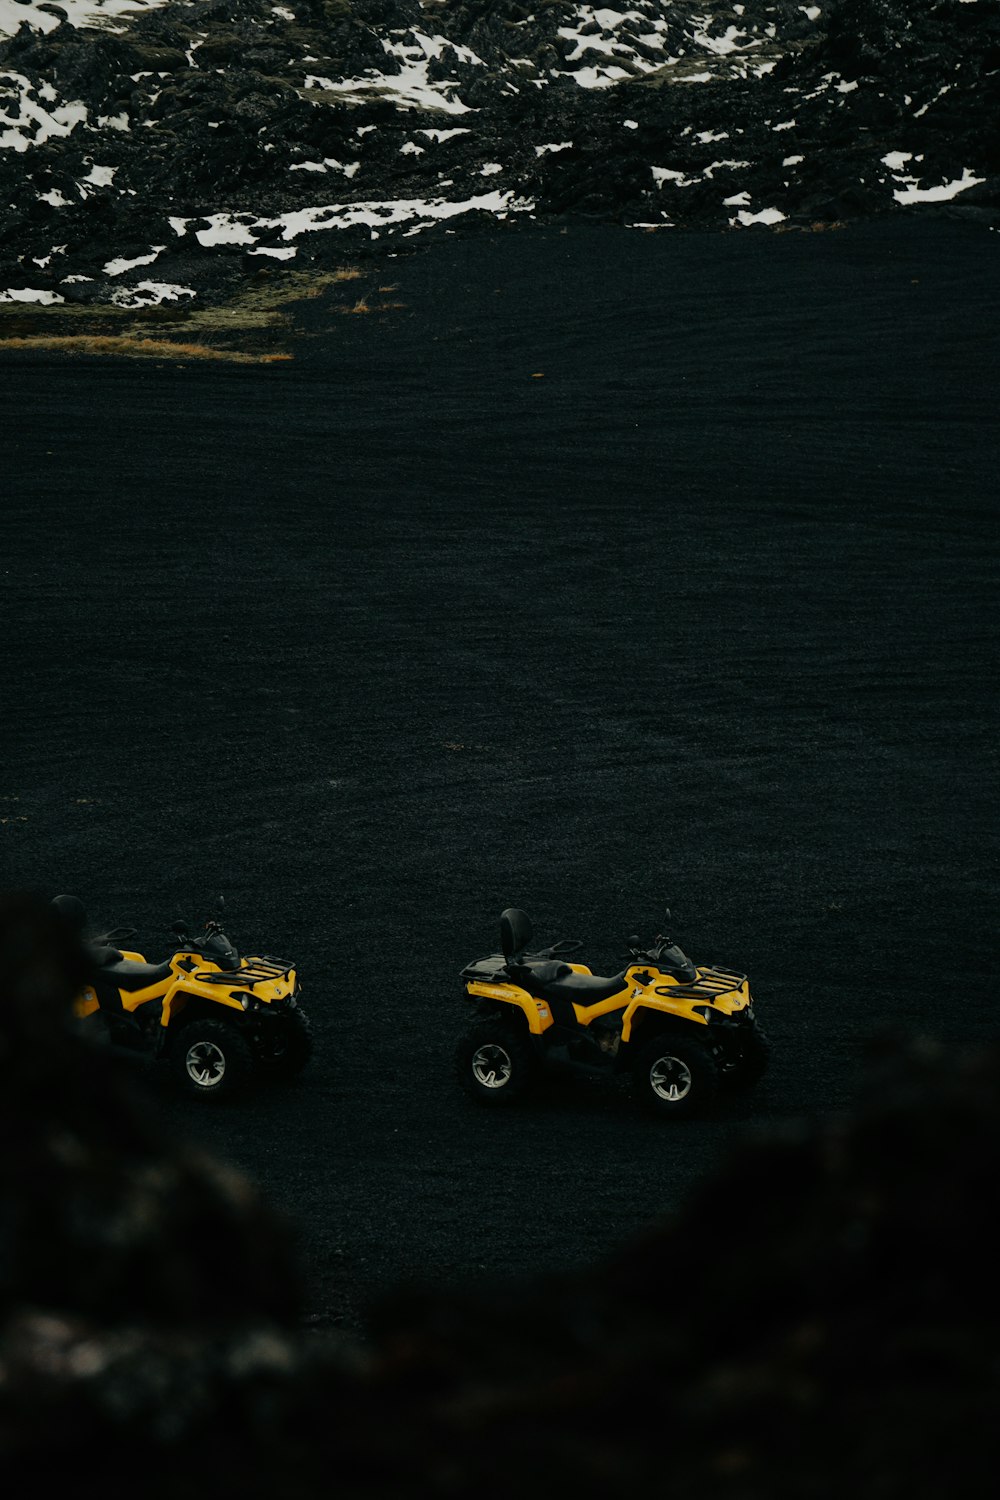 two yellow atvs parked in a black field